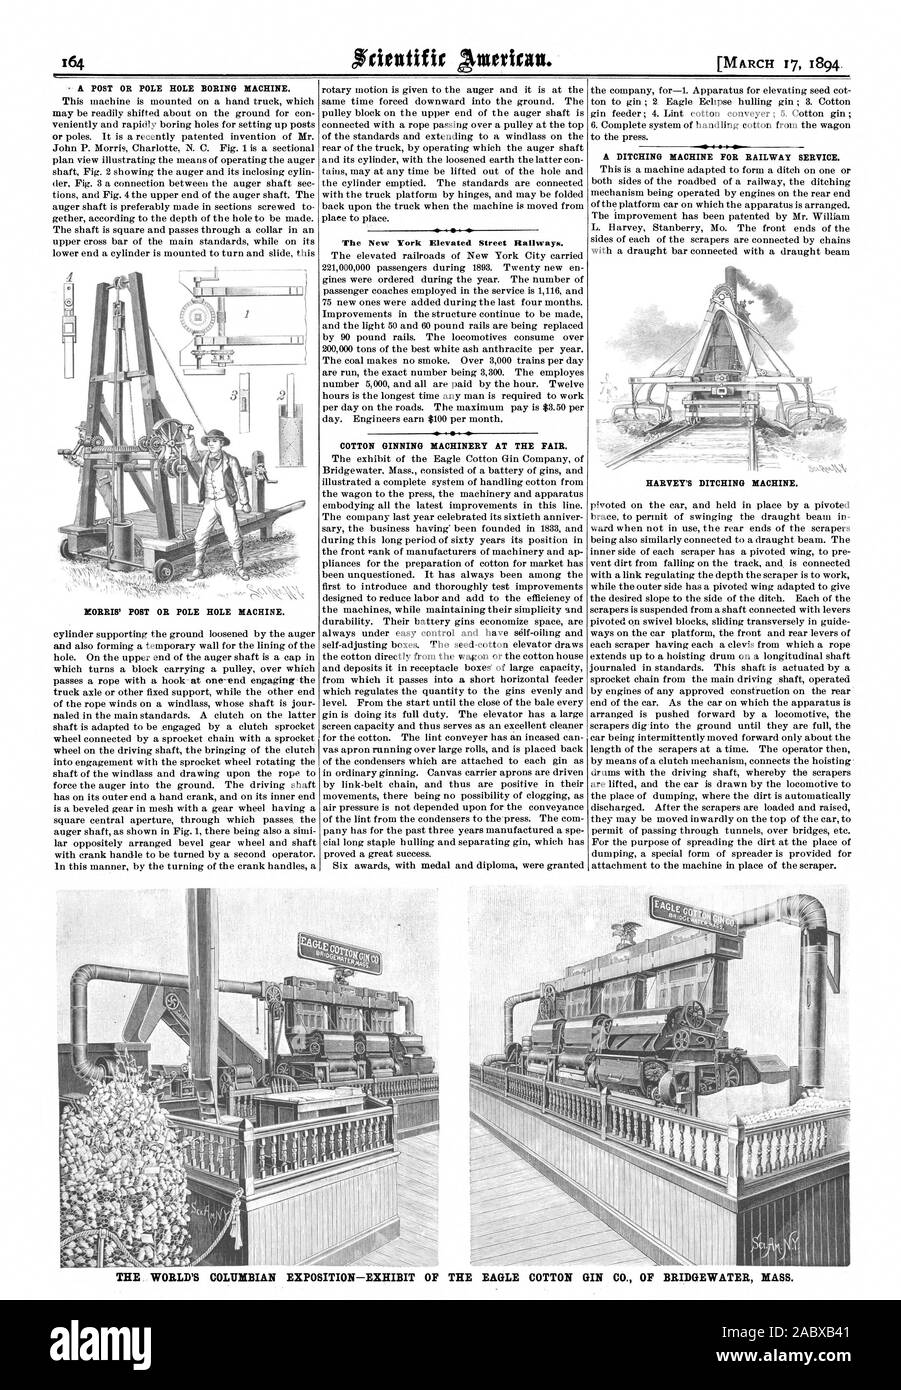 MORRIS' POST OR POLE HOLE MACHINE. The New York Elevated Street Railways. COTTON GINNING MACHINERY AT THE FAIR. A DITCHING MACHINE FOR RAILWAY SERVICE. HARVEY'S DITCHING MACHINE. „ SINN04M THE WORLD'S COLUMBIAN EXPOSITION—EXHIBIT OF THE EAGLE COTTON GIN CO. OF BRIDGEWATER MASS., scientific american, 94-03-17 Stock Photo